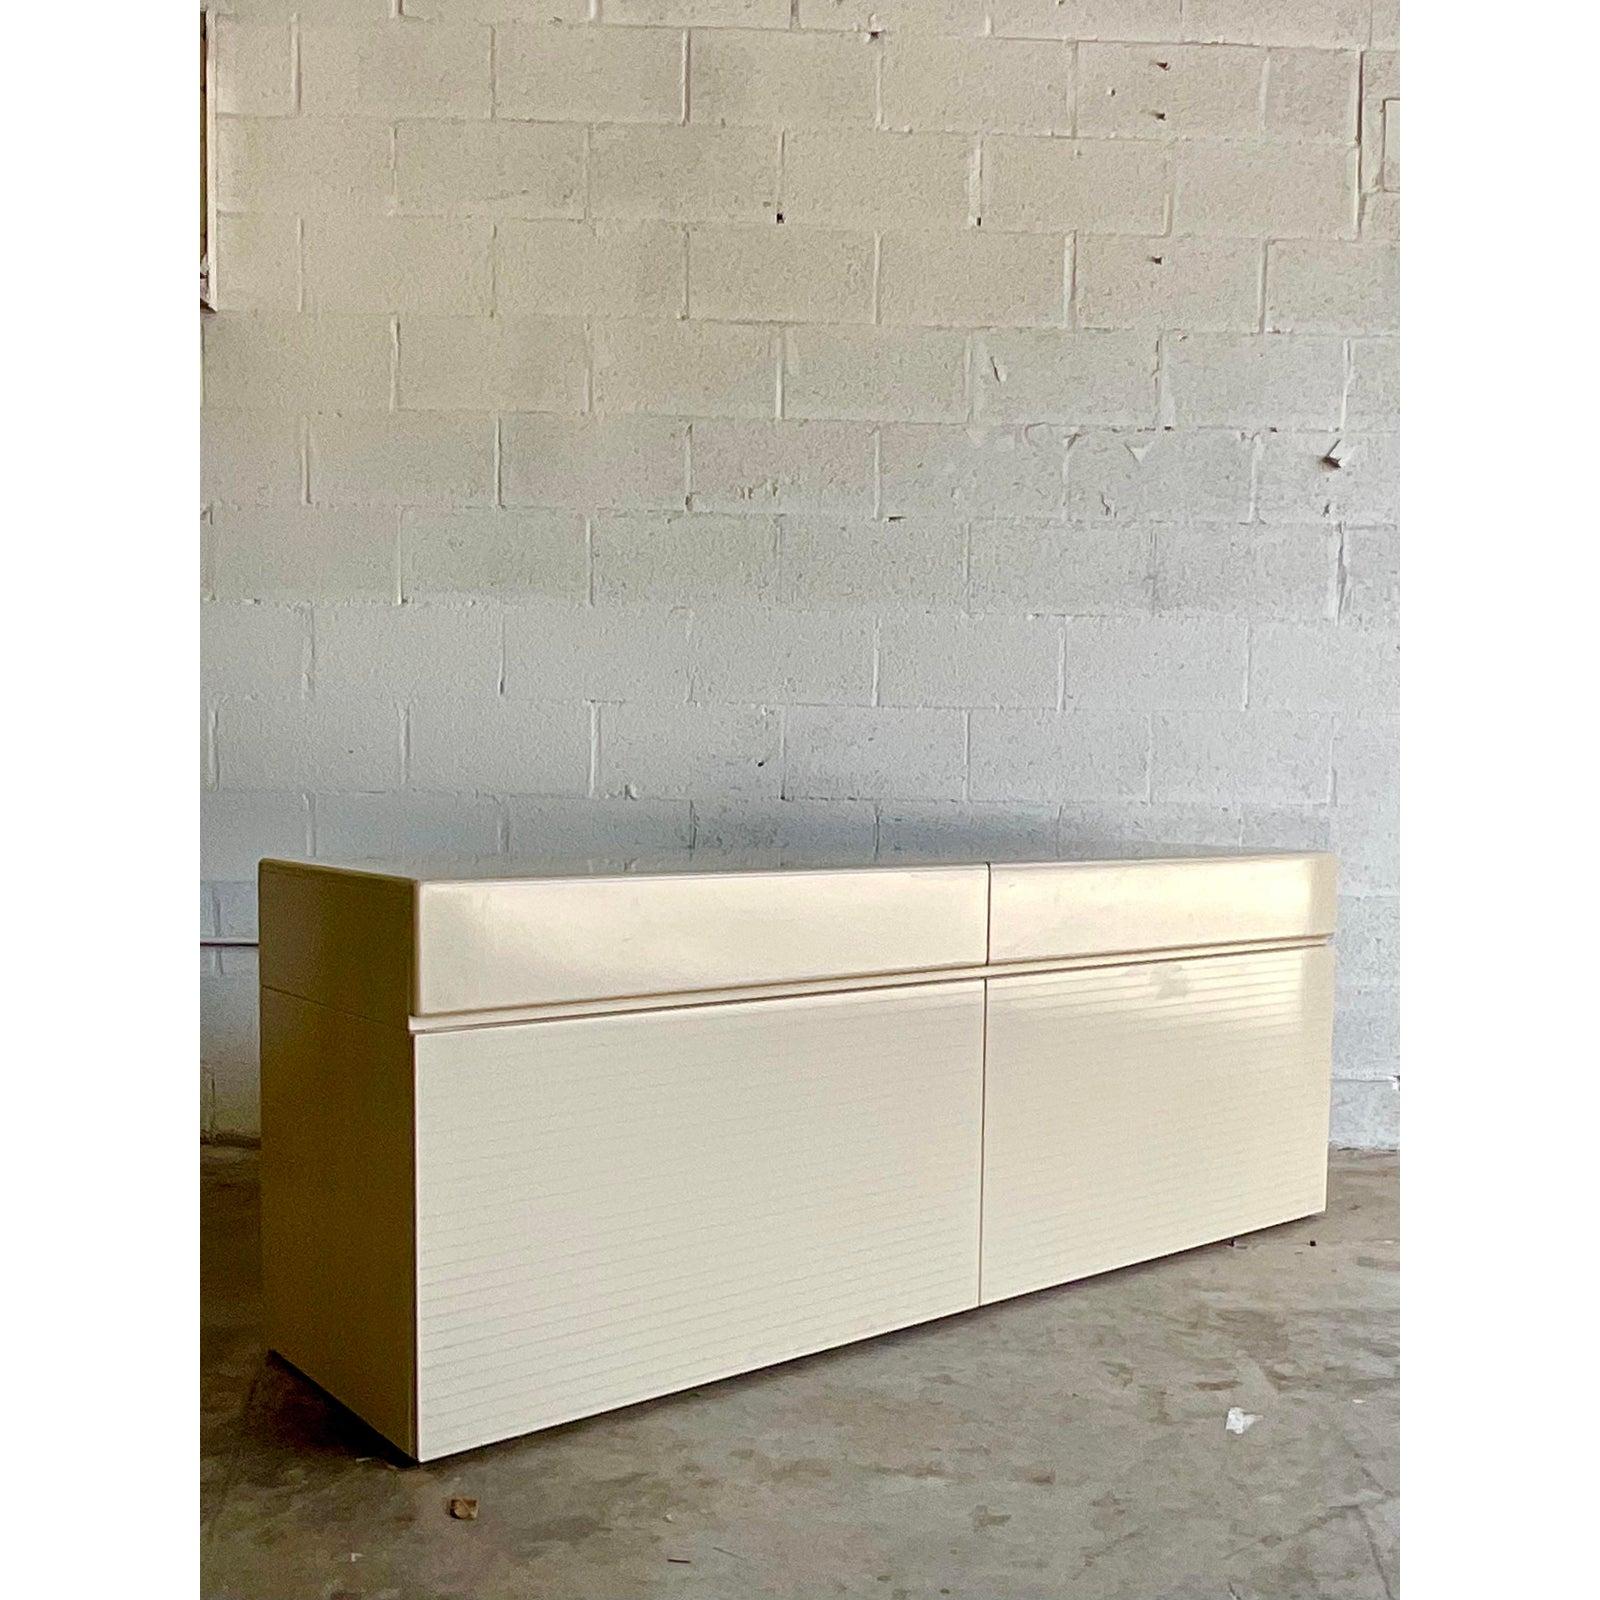 Incredible vintage Rougier credenza. Beautiful high glass lacquer in a cream finish with a silver pinstripe detail. Extra deep drawers for China storage. Just the chicest thing ever. Acquired from a Miami estate.